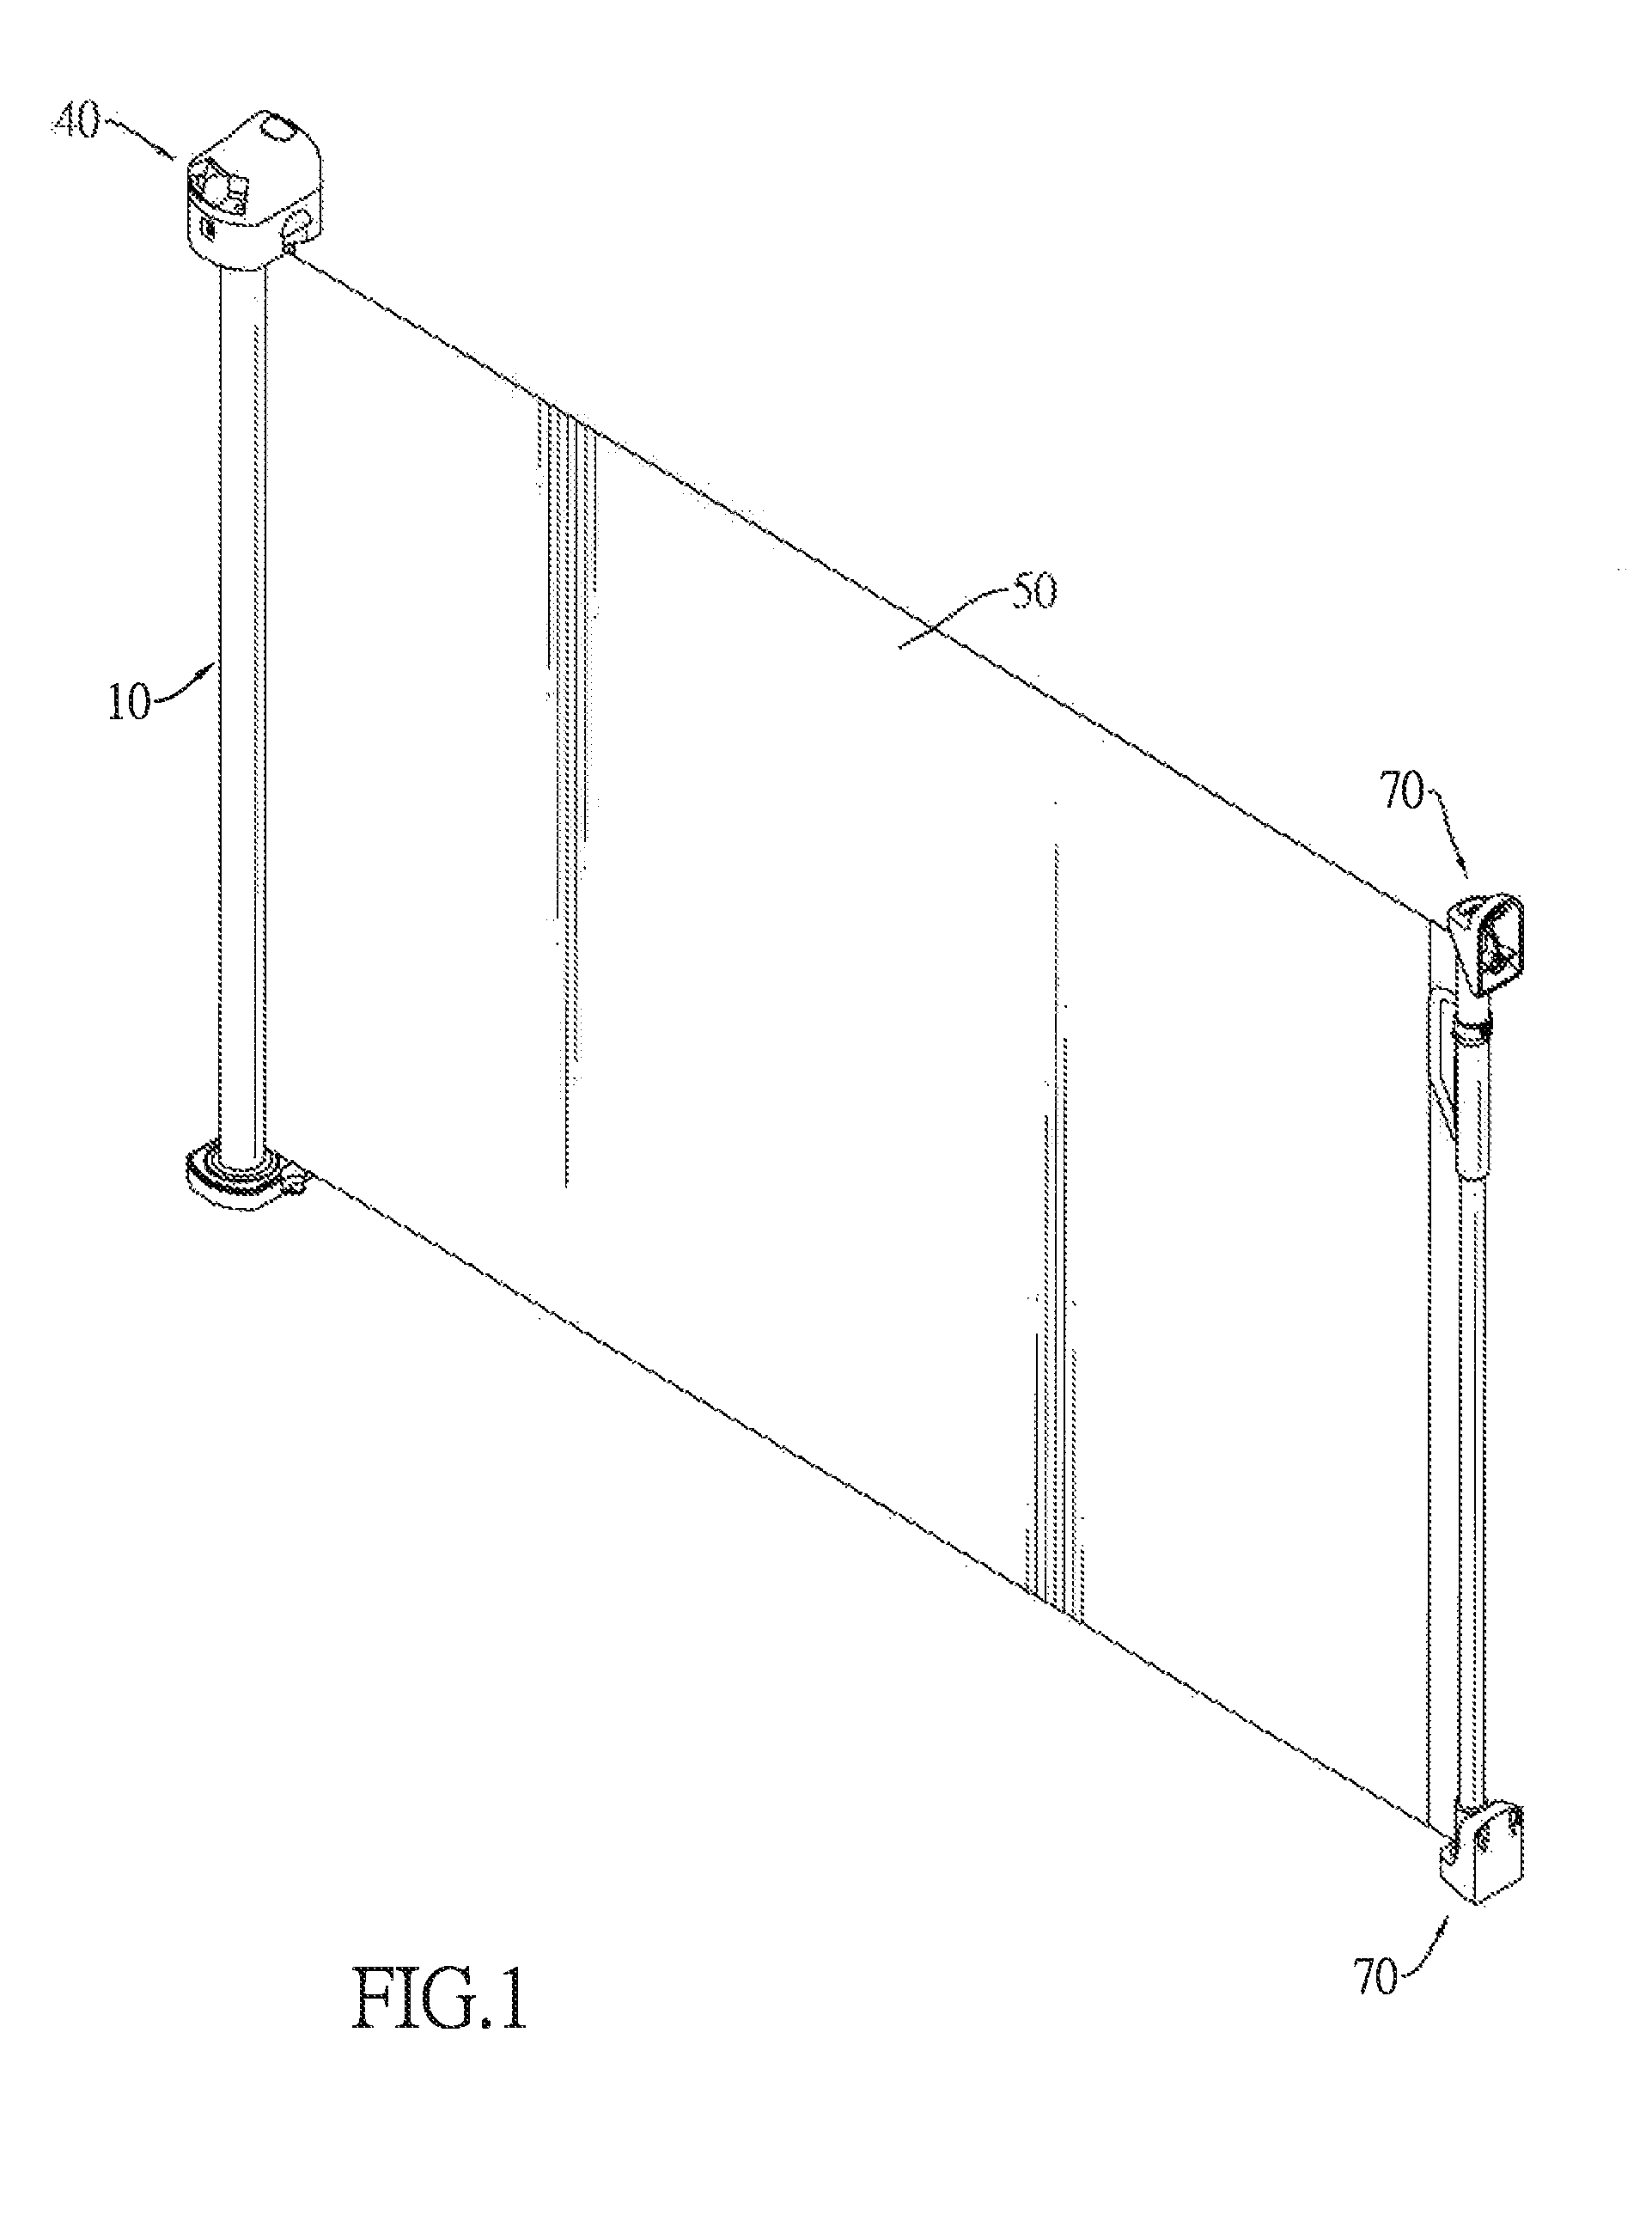 Retractable safety gate